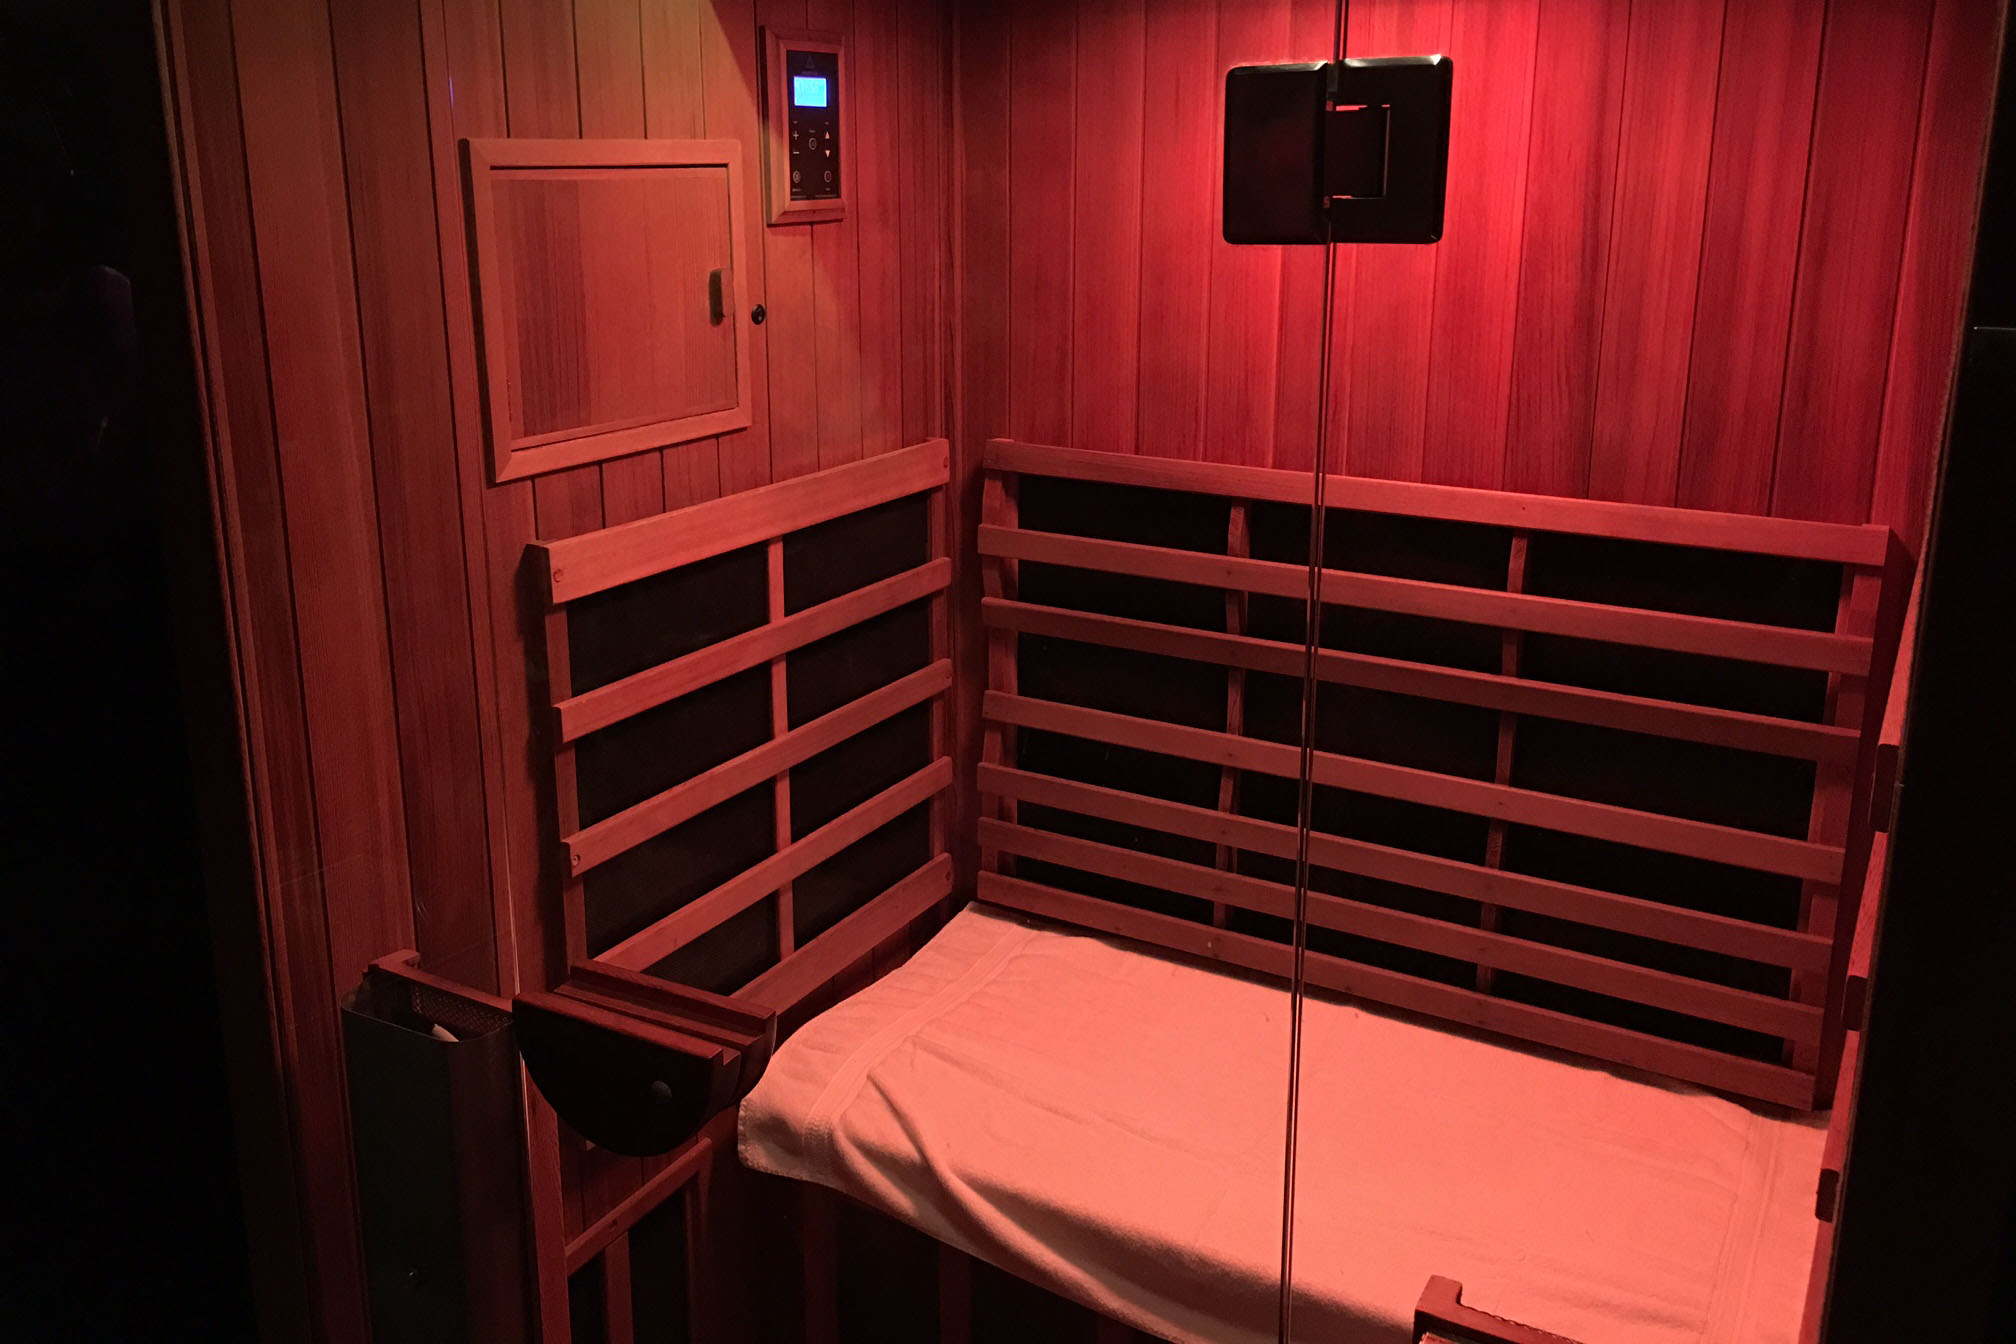 What You Need to Know About So-Hot-Right-Now Infrared Spa Therapy - Bloomberg